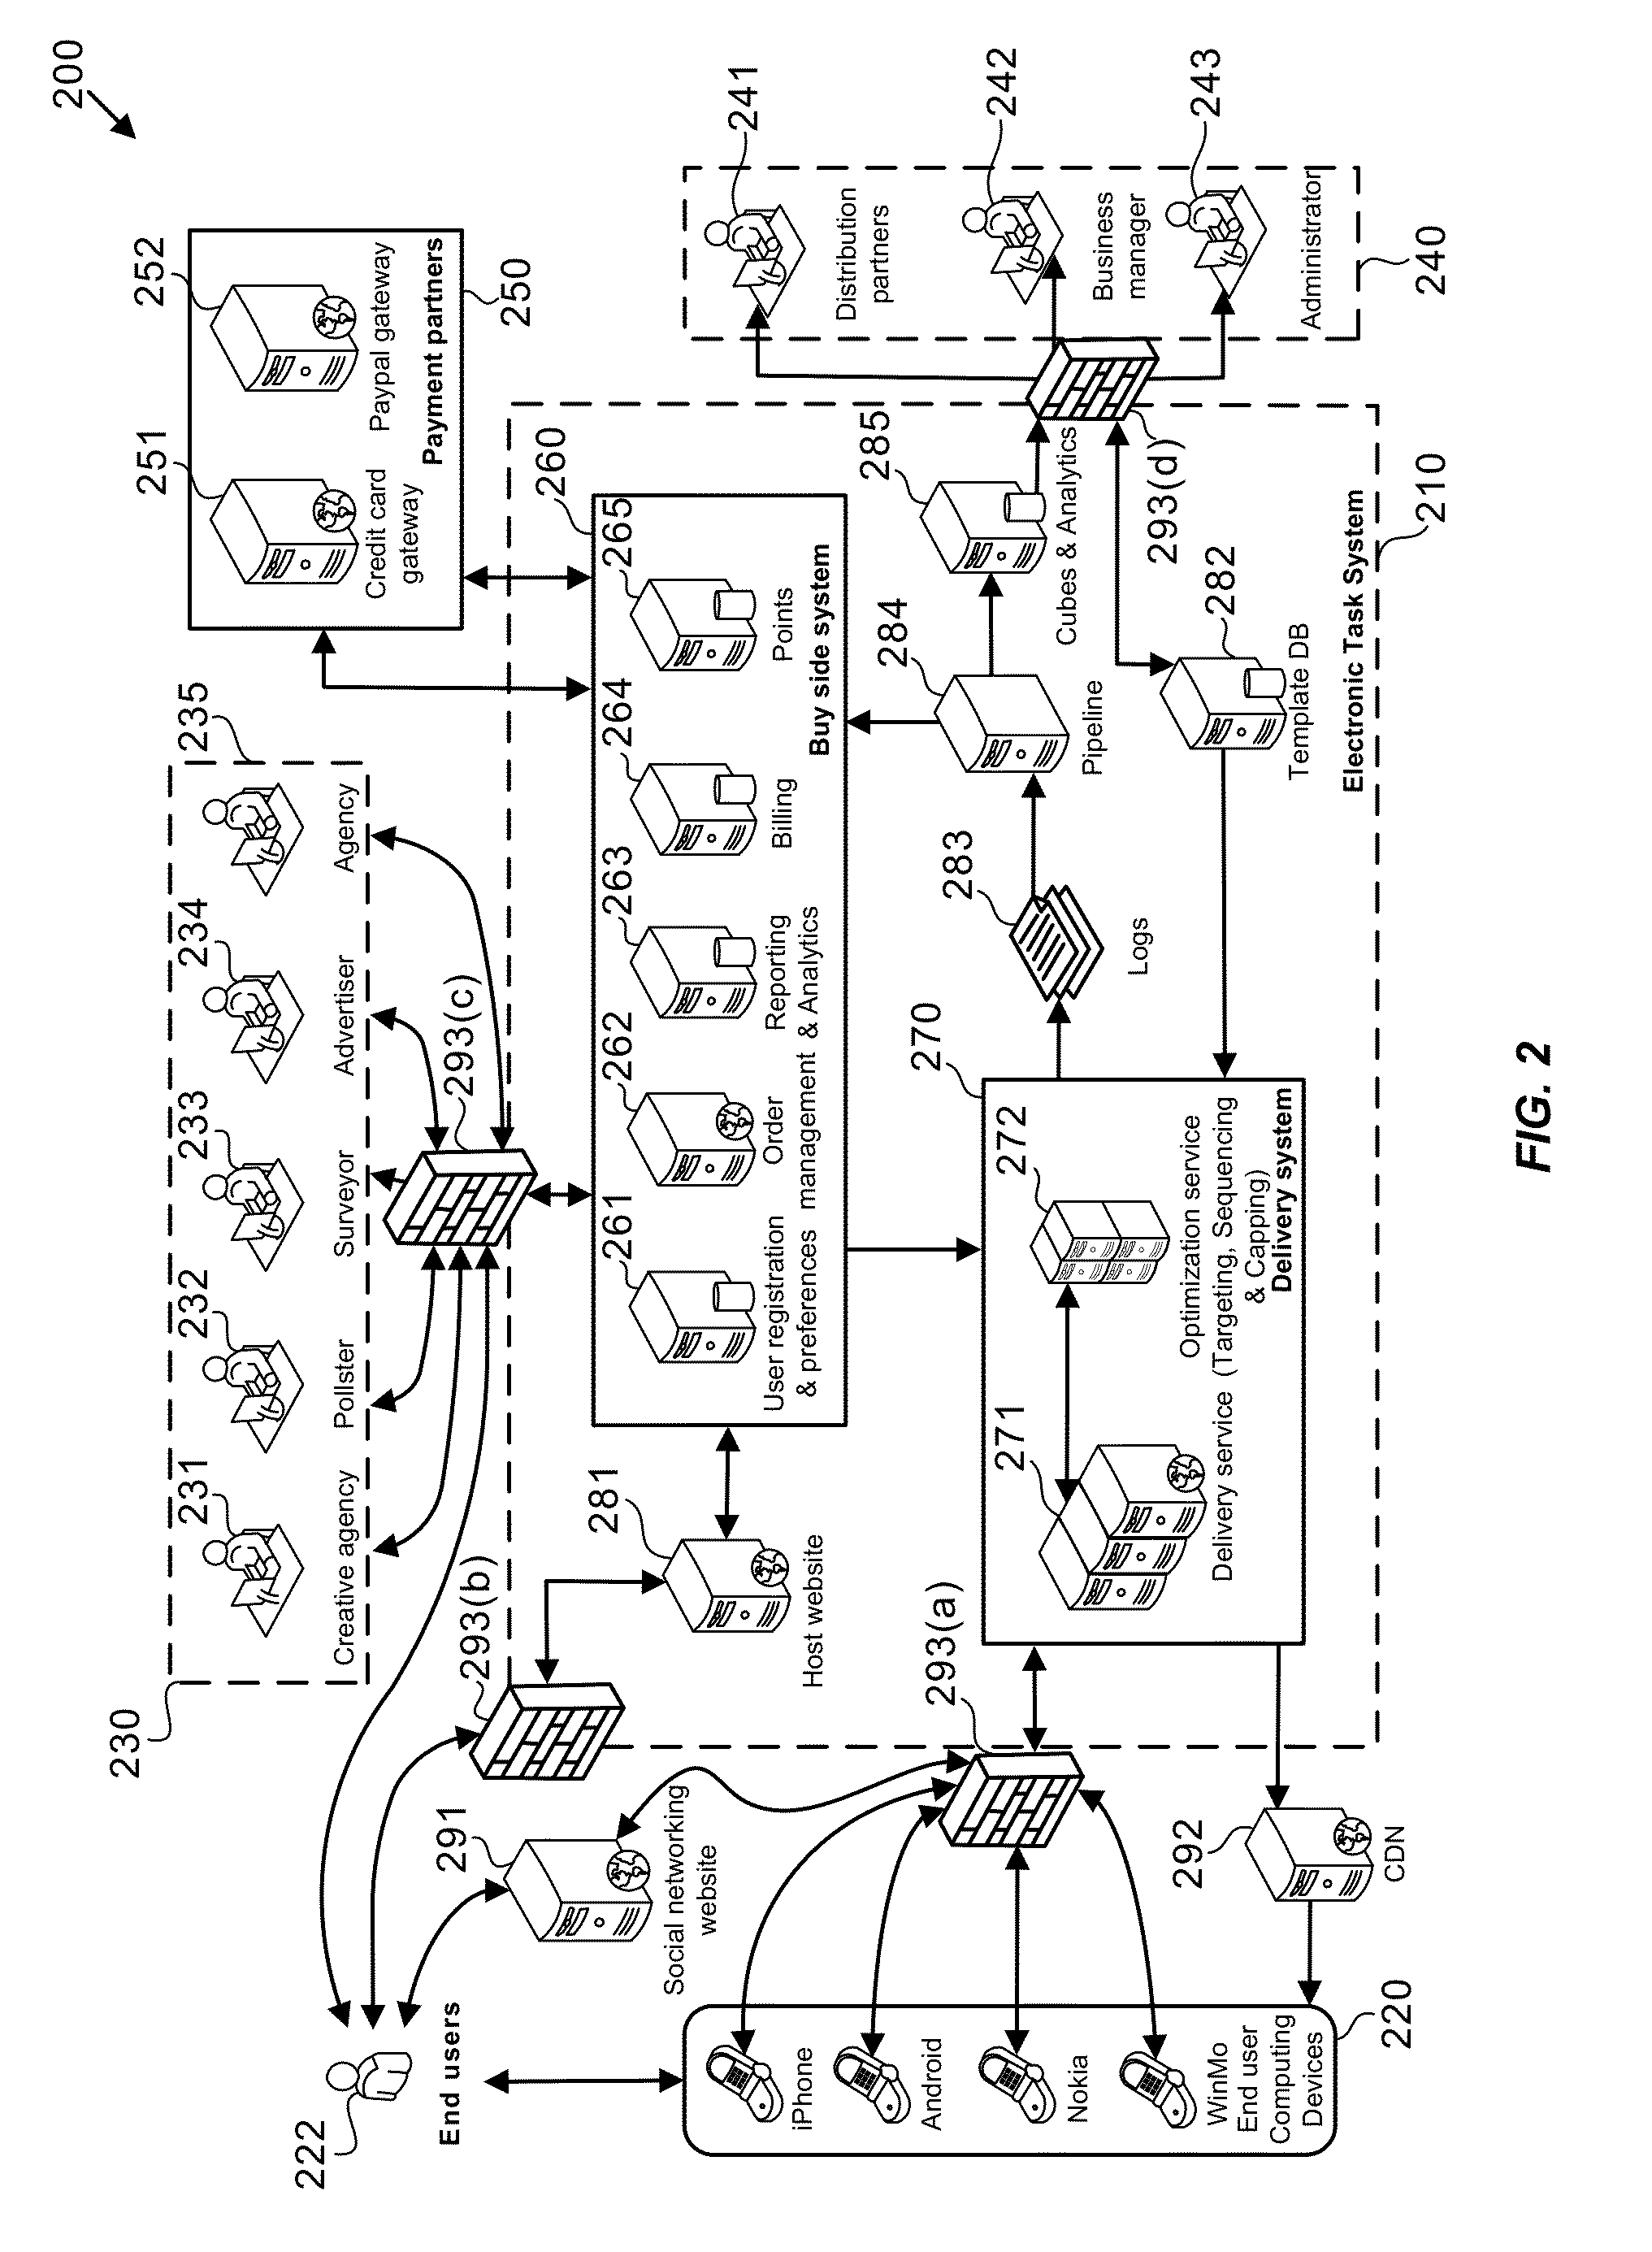 Methods, apparatus and systems for providing a multi-purpose task completion platform